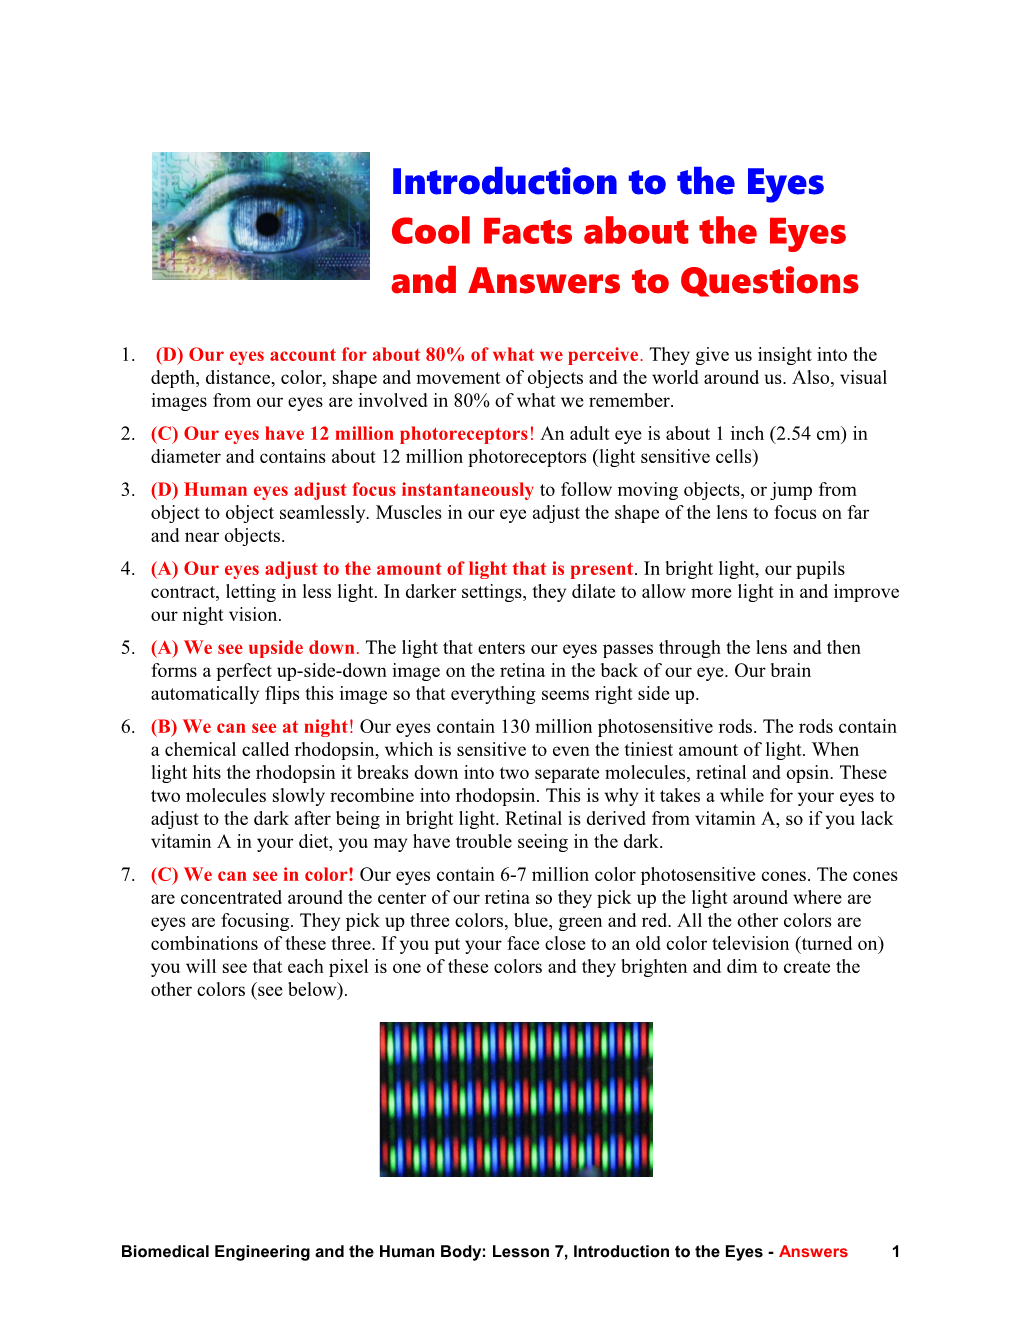 Introduction to the Eyescool Facts About the Eyesand Answers to Questions